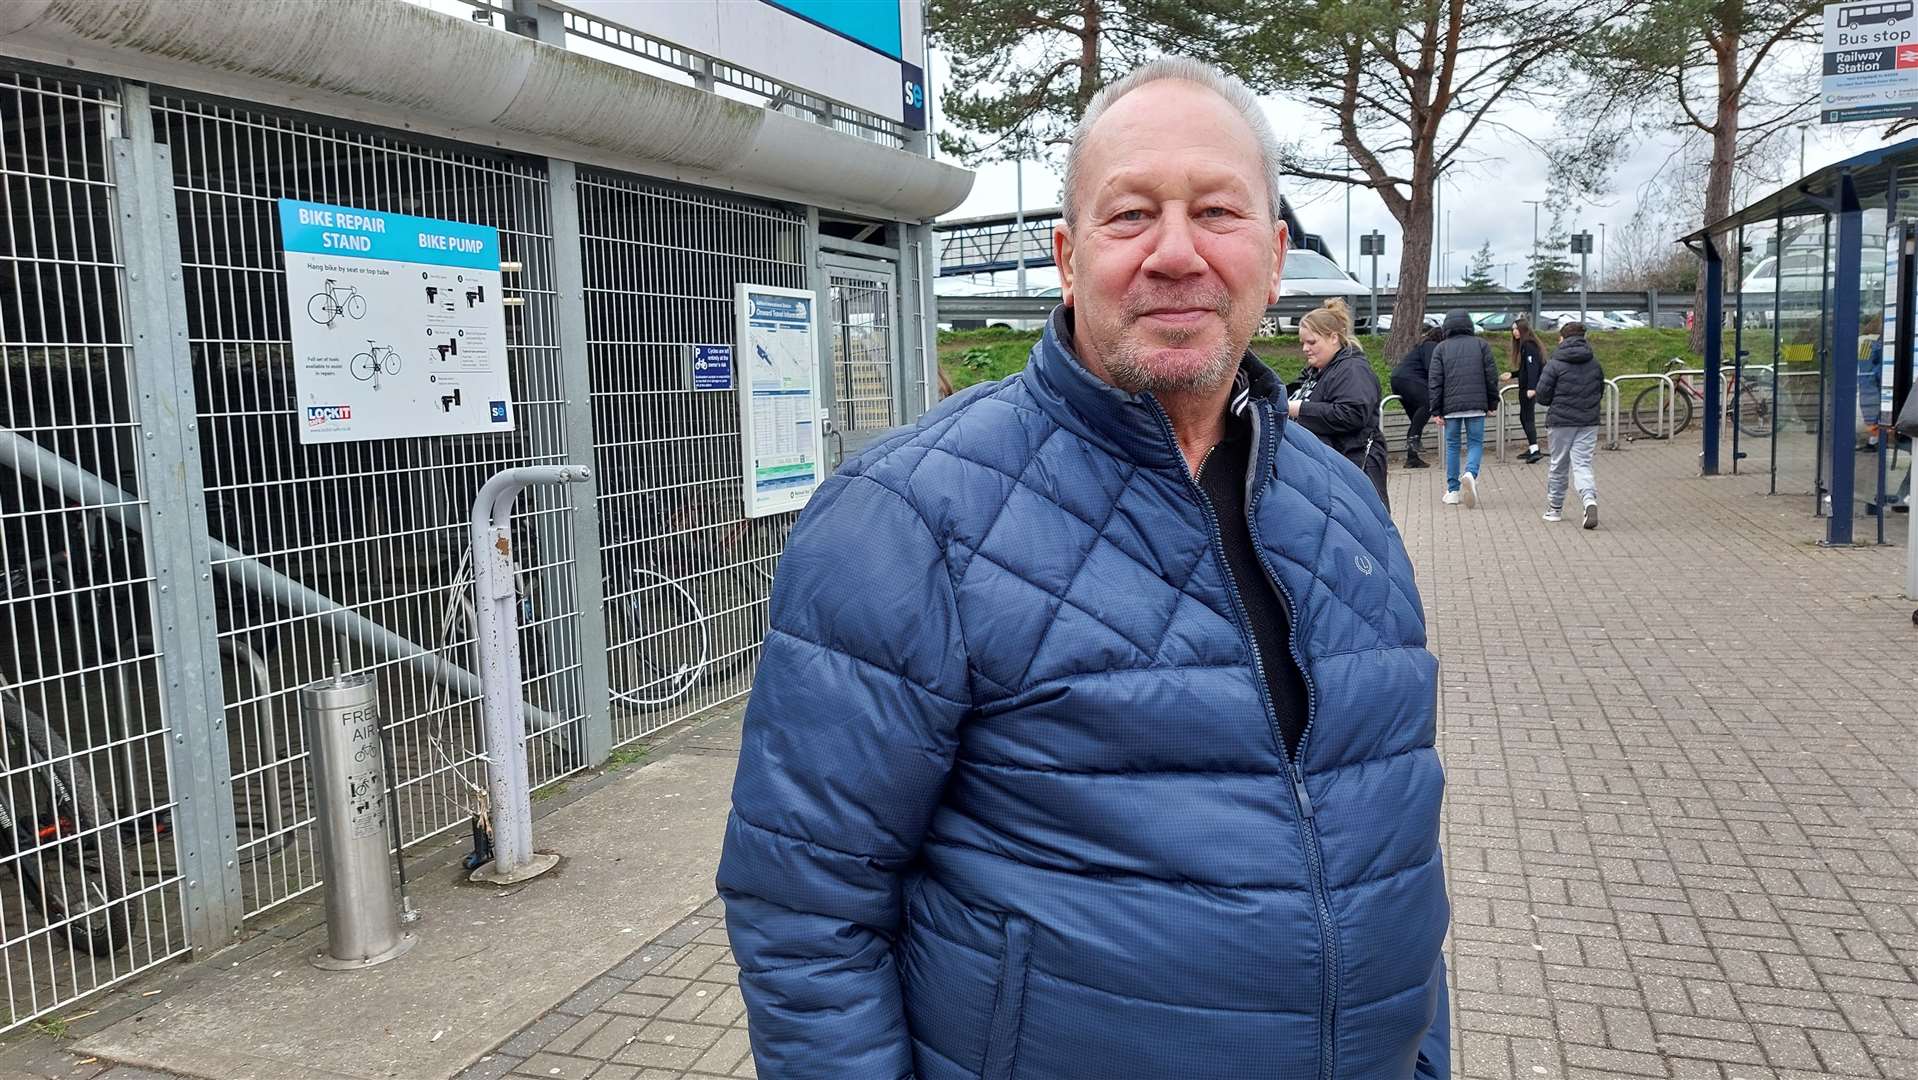 Rodney White, 70, from Beaver Lane said the attraction of moving to Ashford was going now it has lost its international rail link